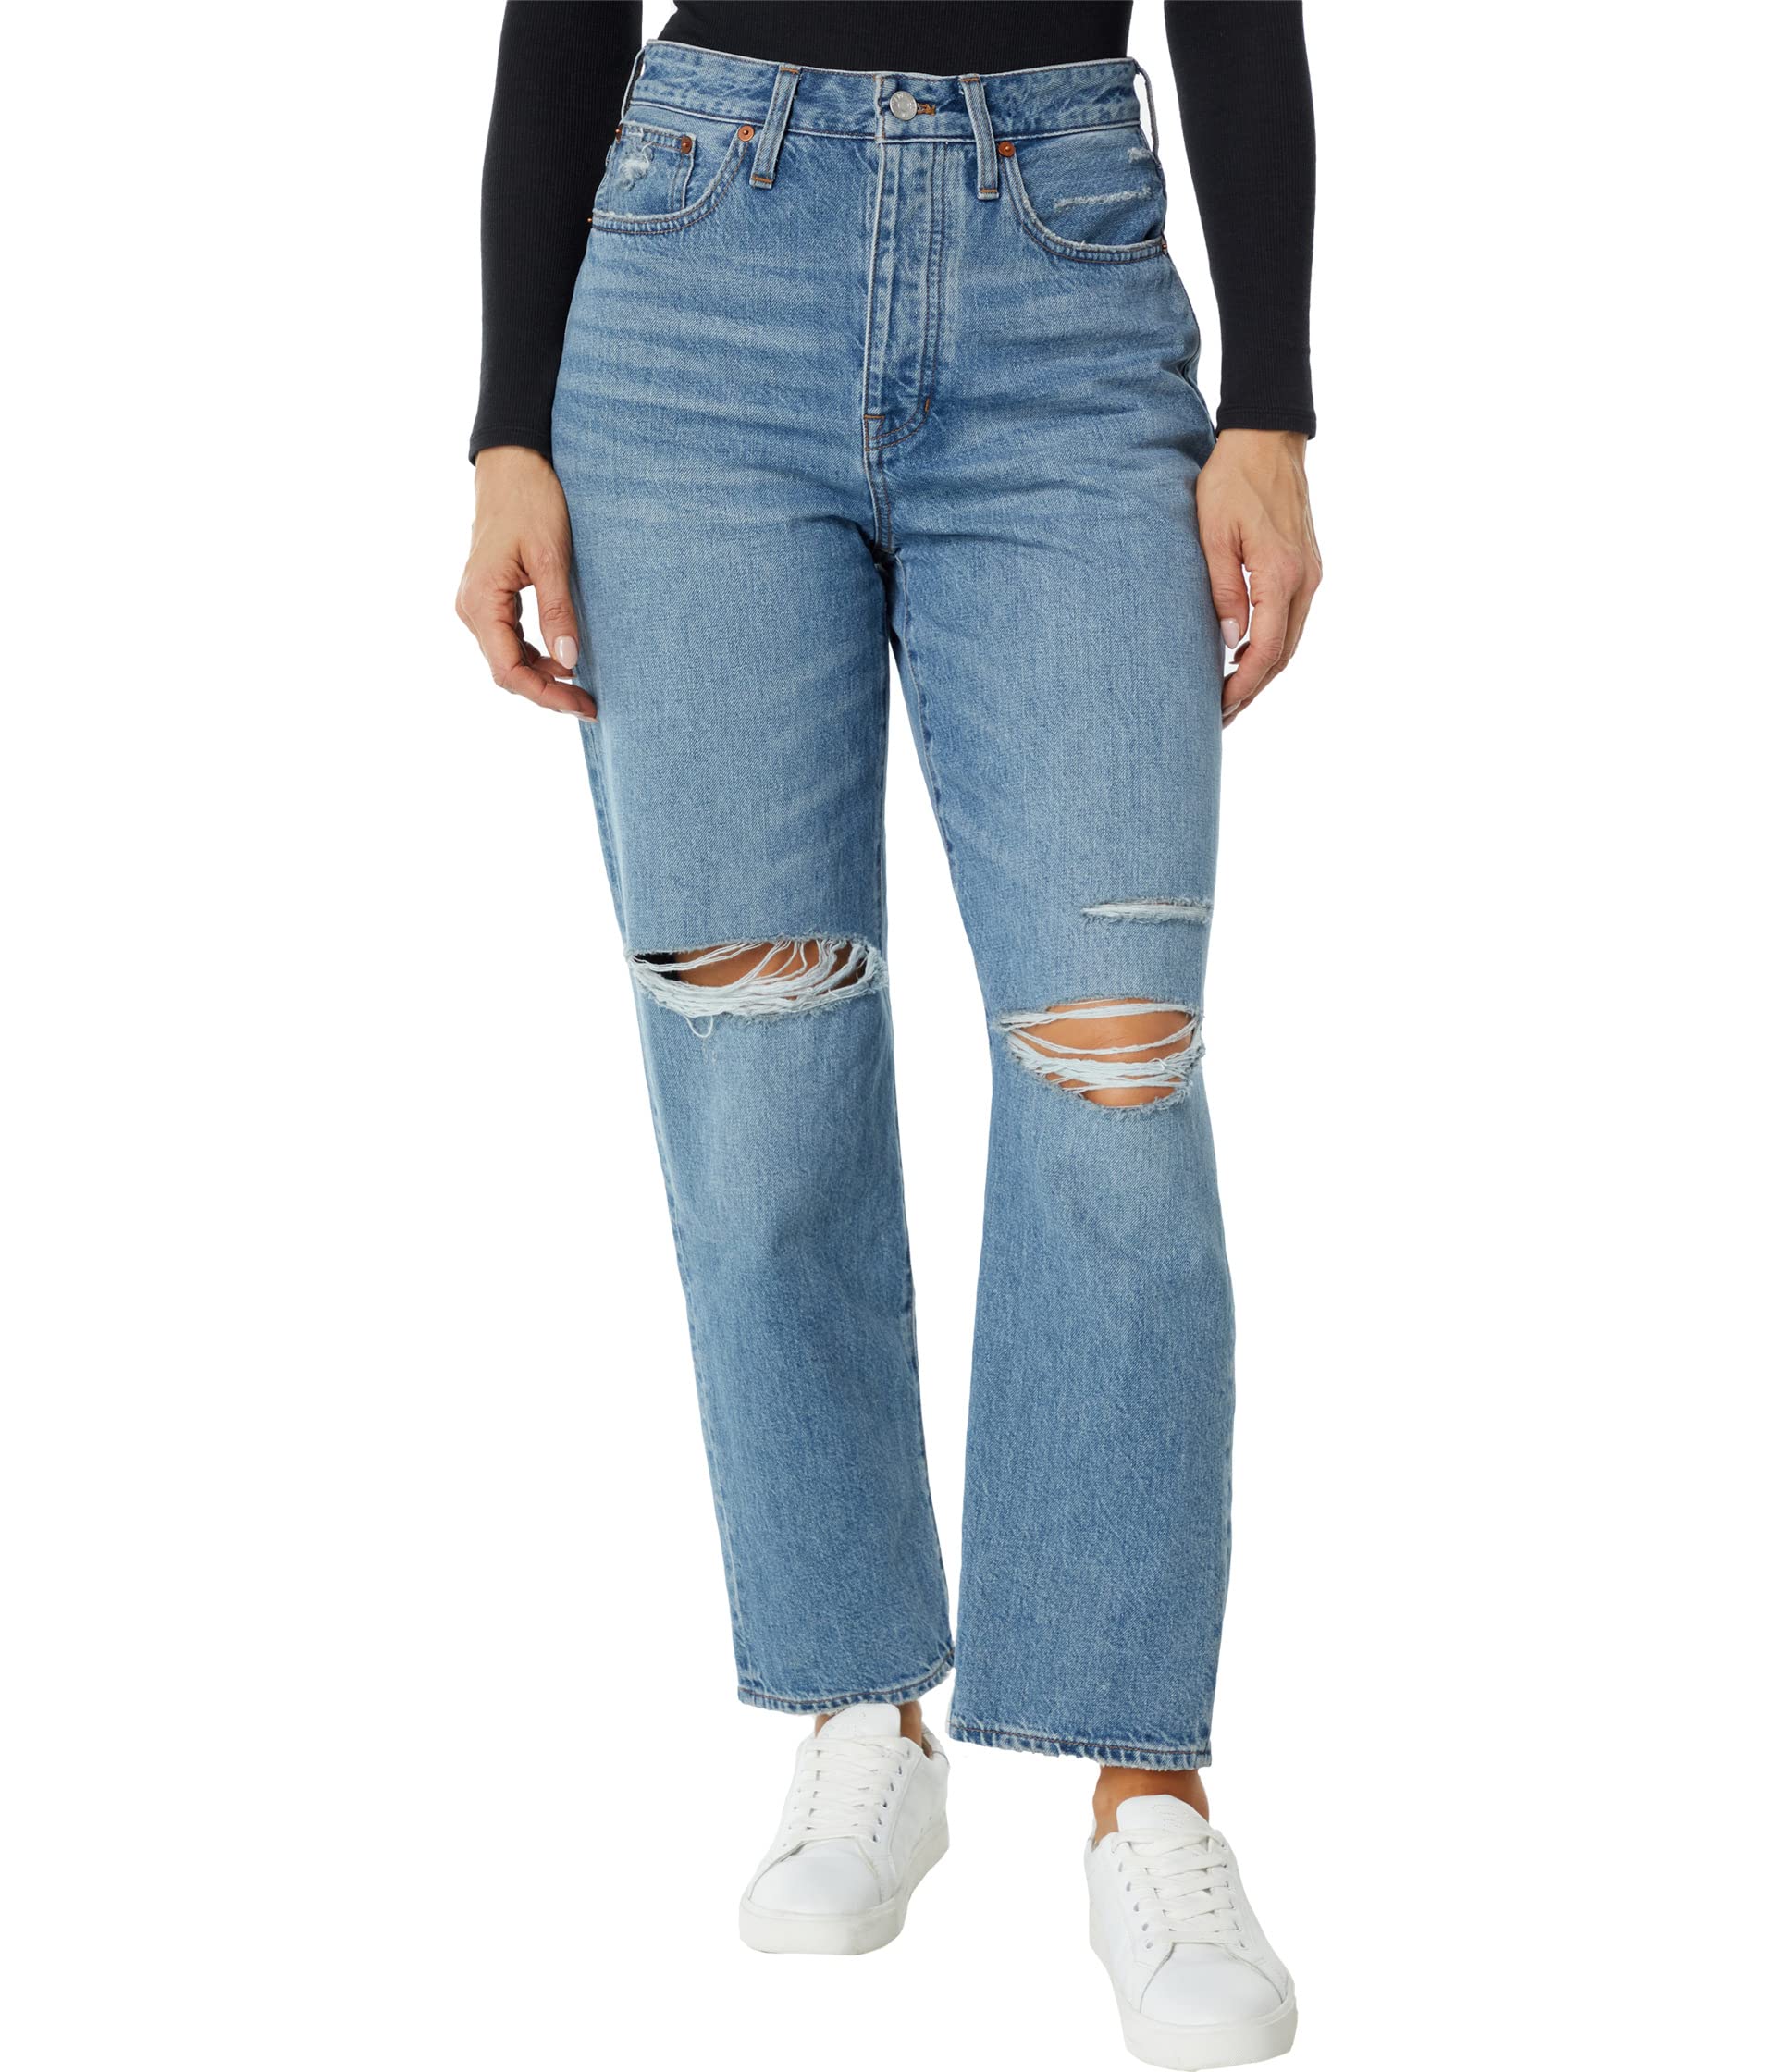 Джинсы Madewell, The Dadjean in Dustin Wash: Destroyed Edition thao dustin you ve reached sam